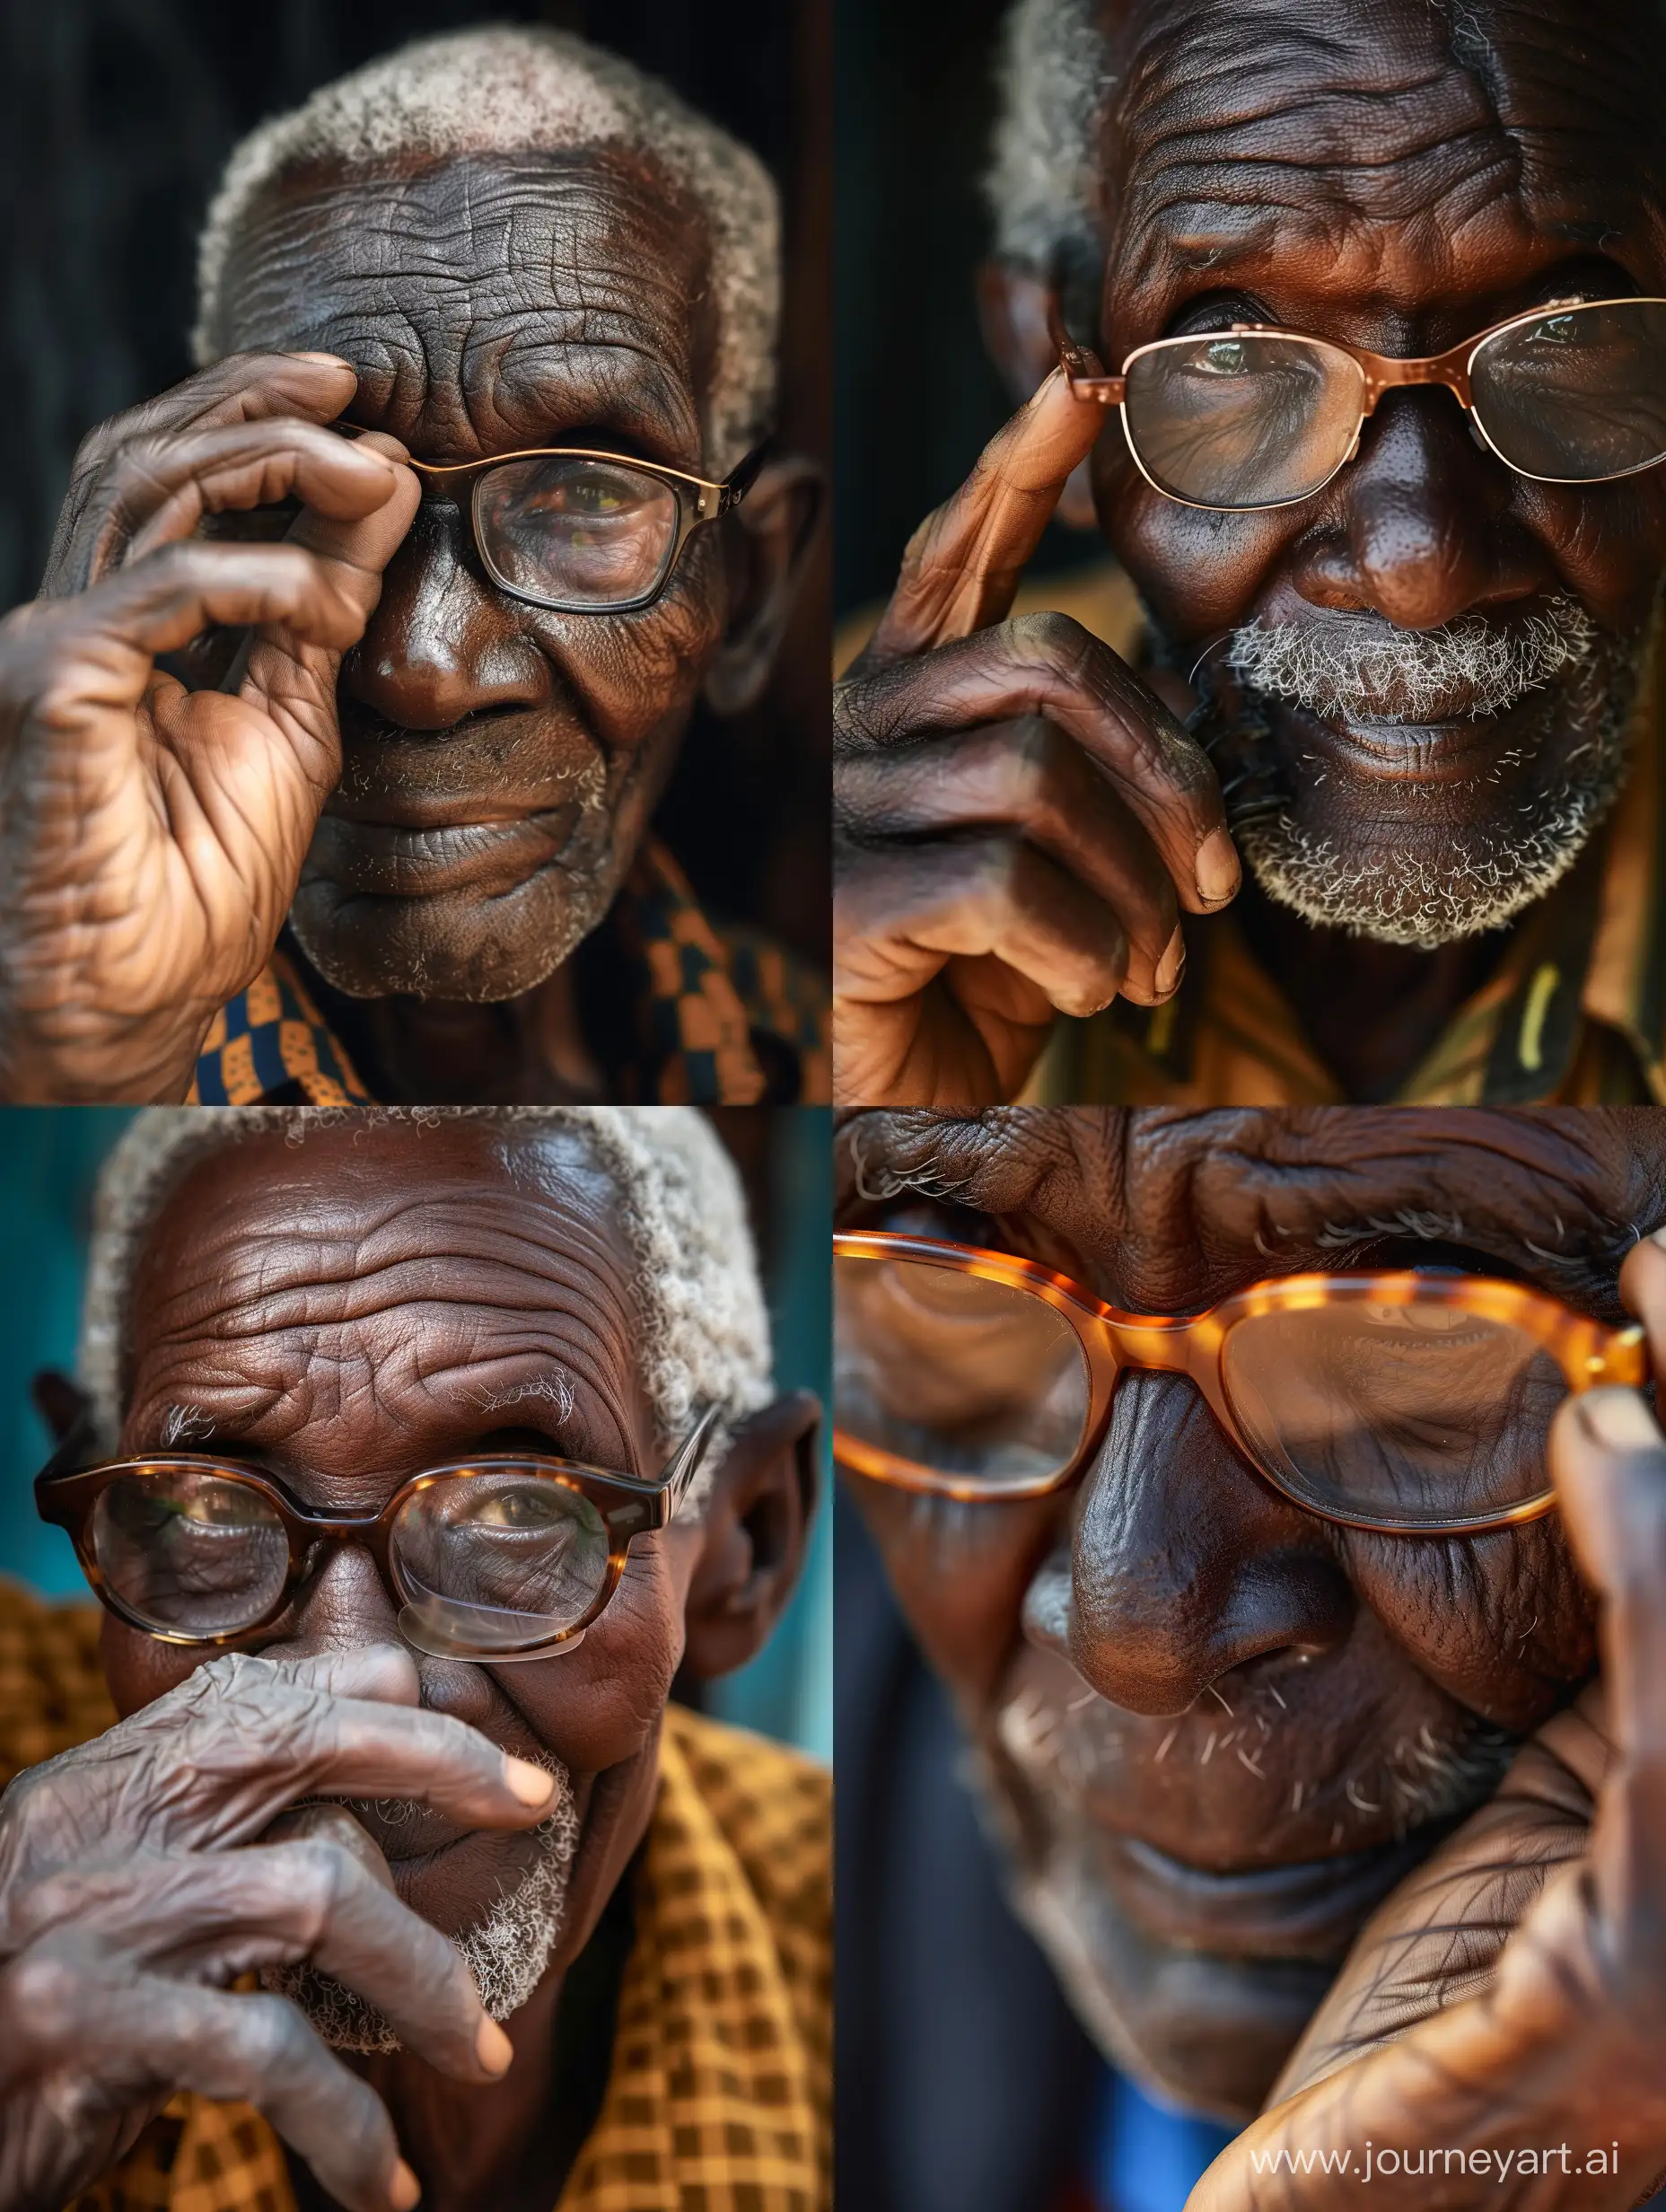 Detailed hand of an old African man adjusting his glasses